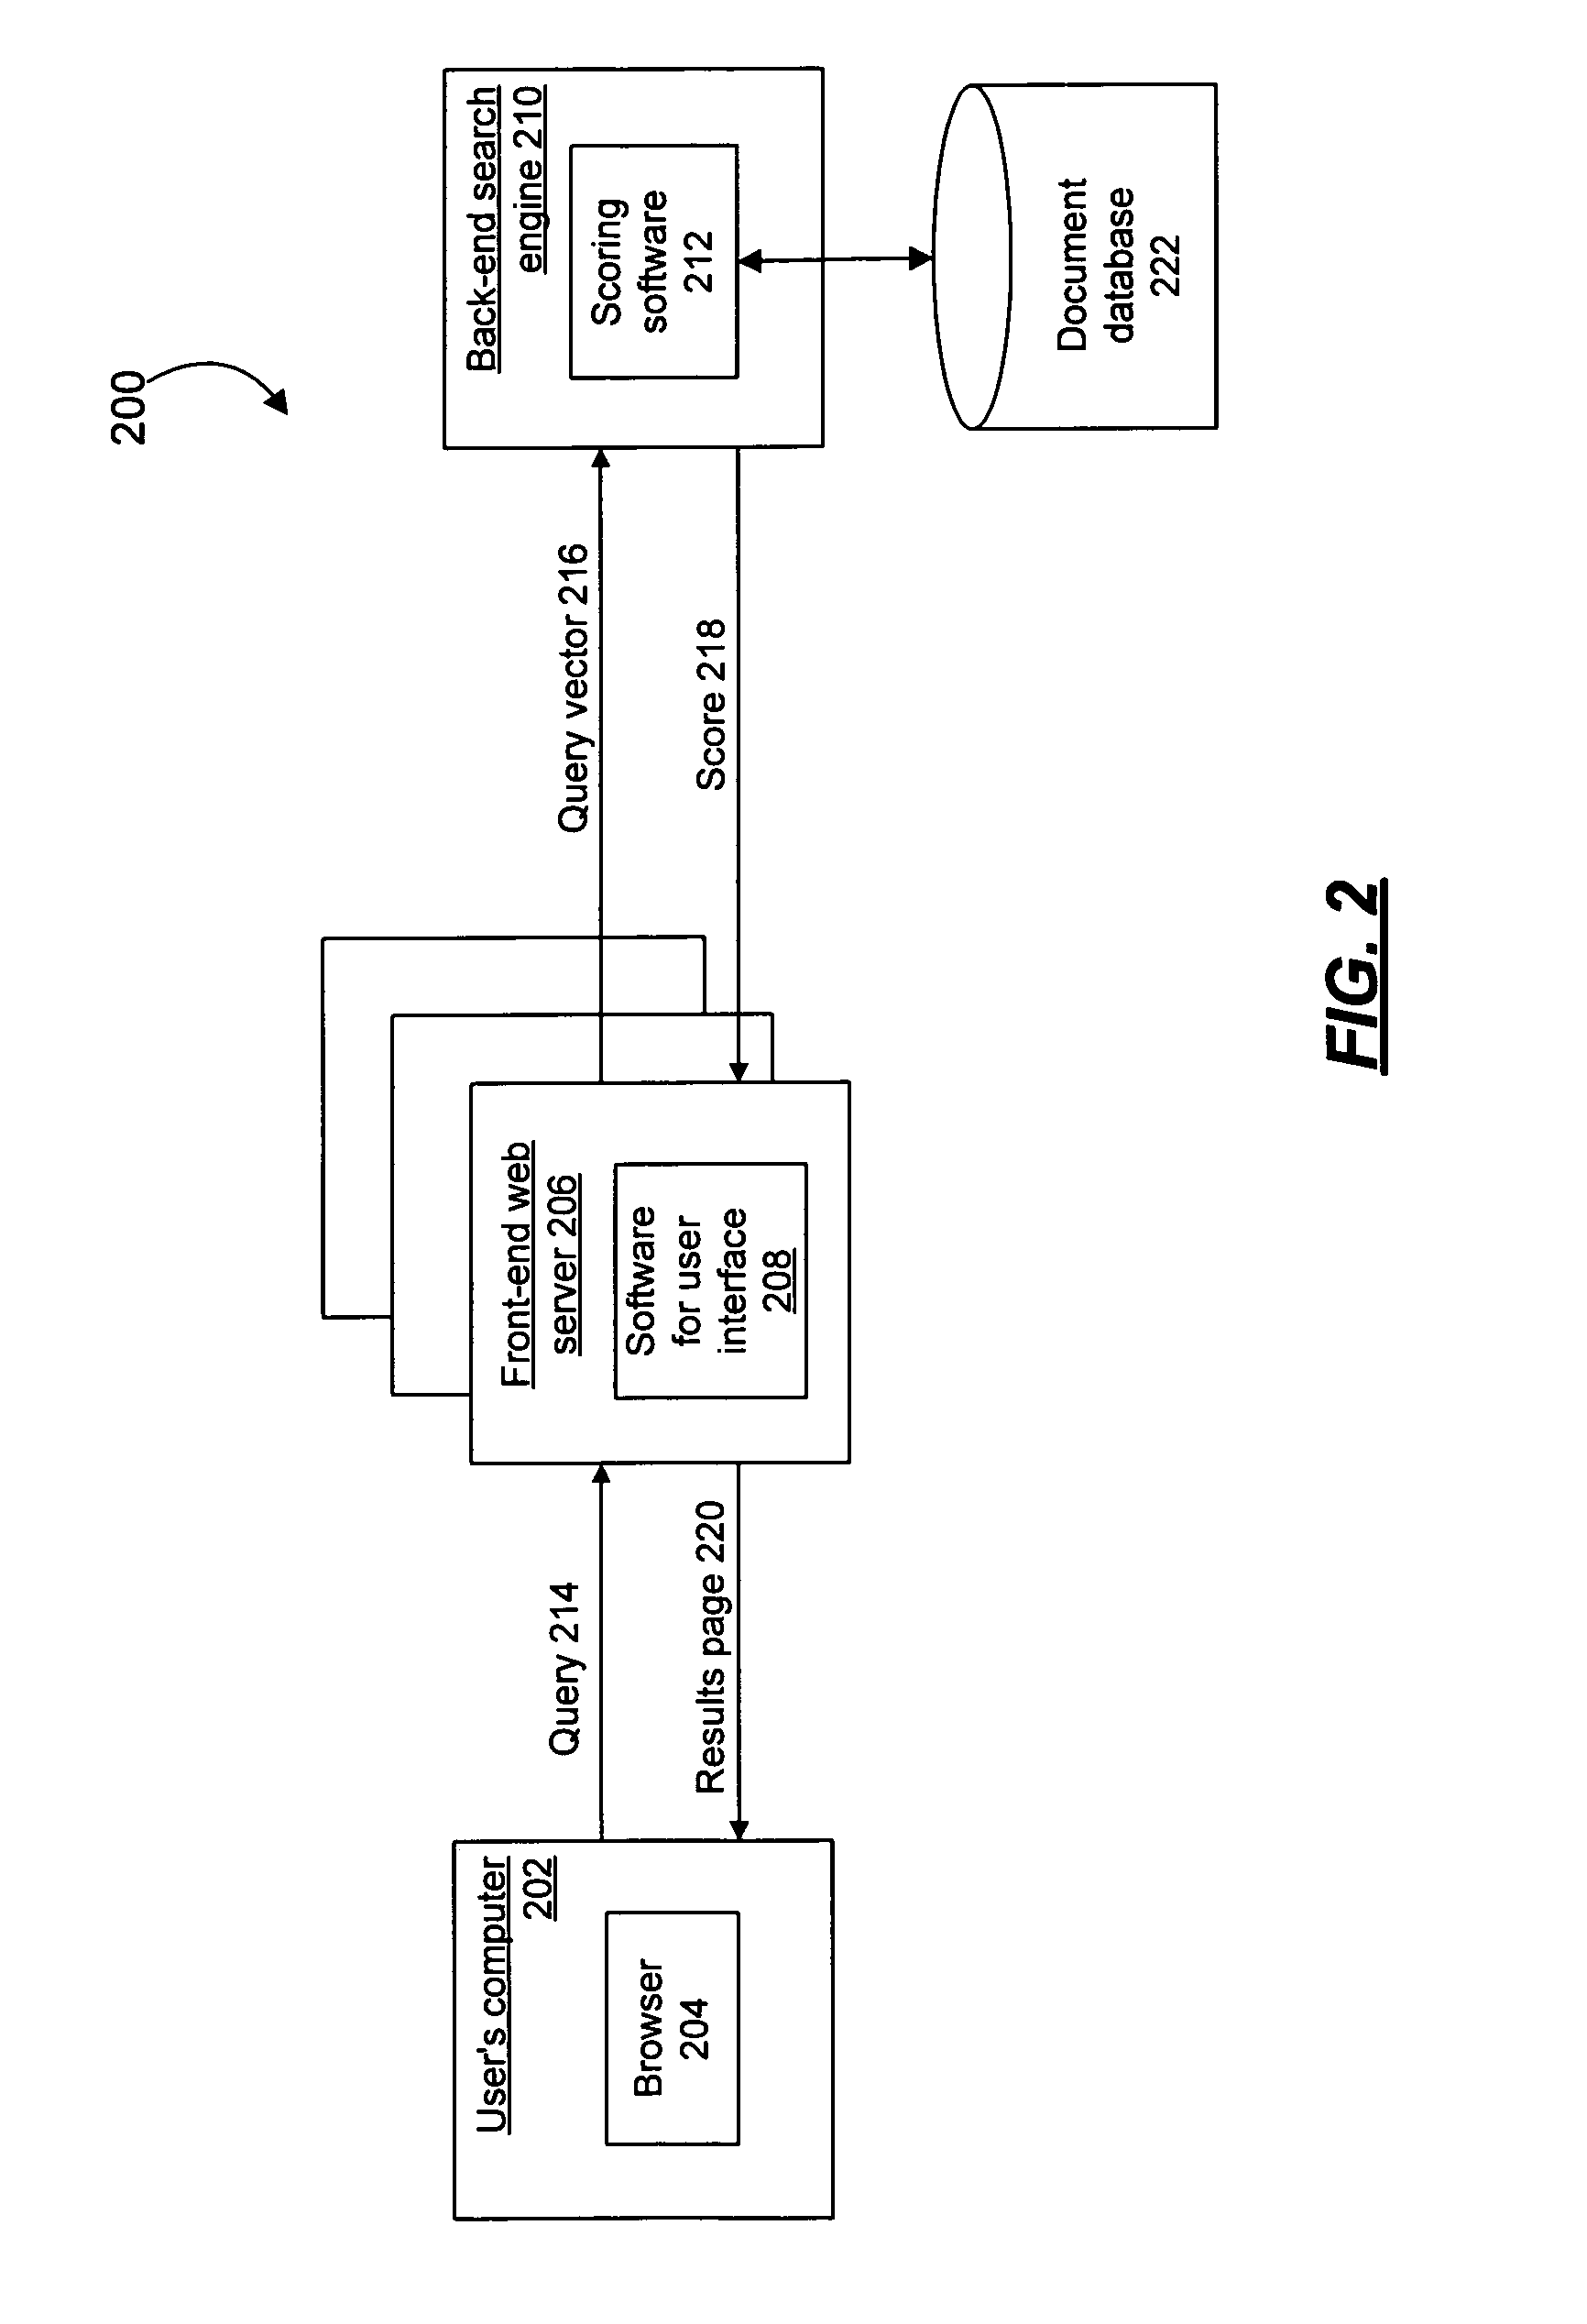 System and method for providing search results with configurable scoring formula